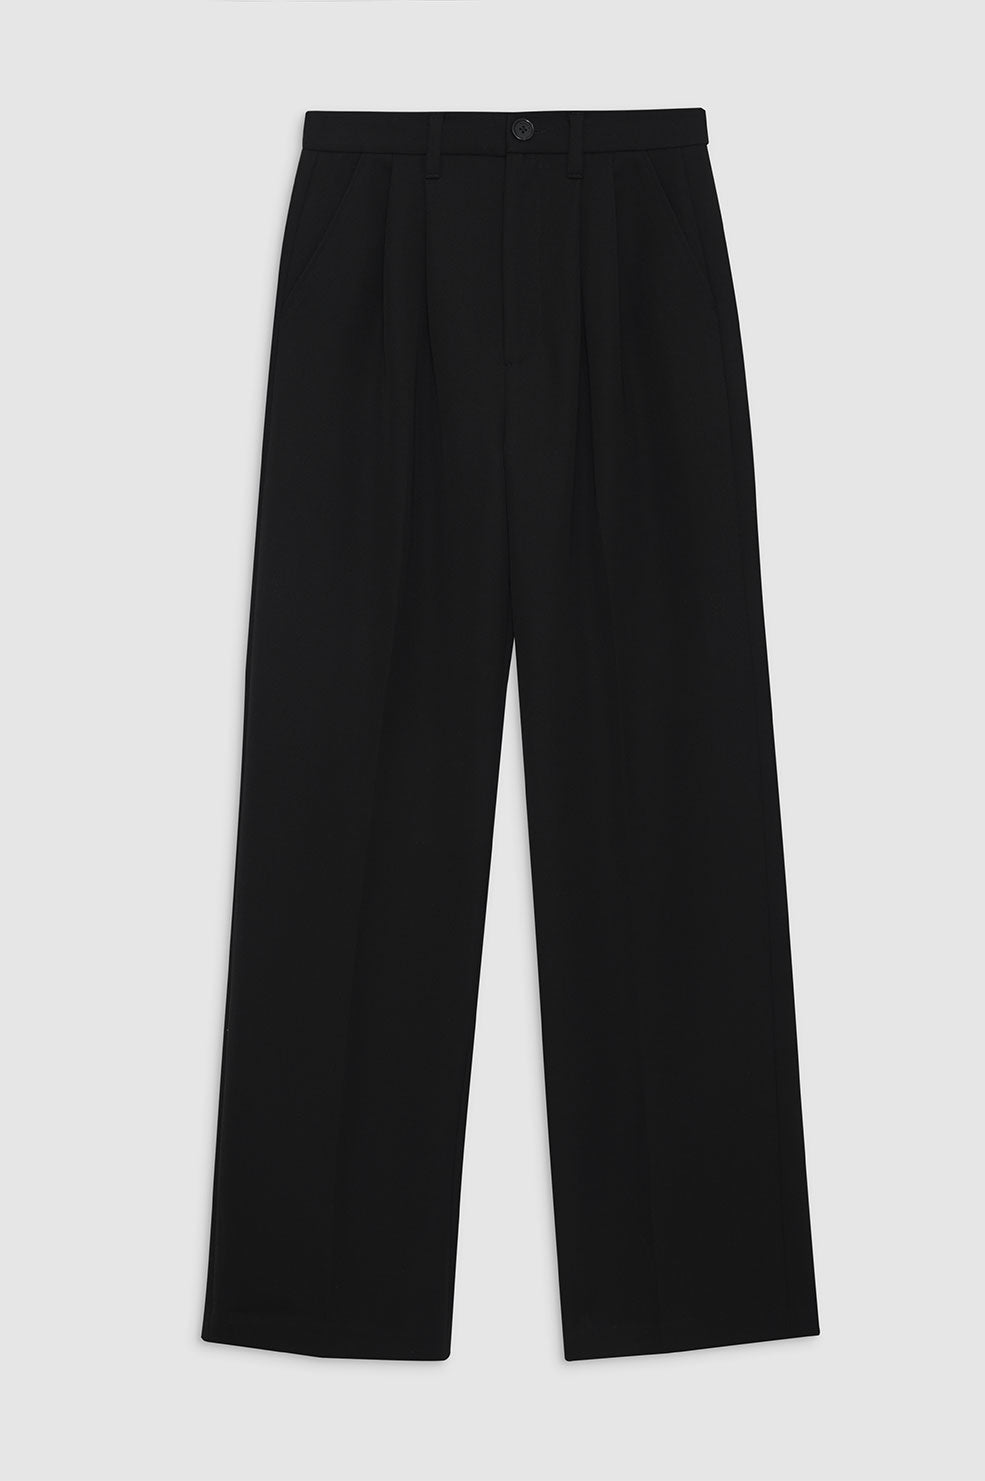 ANINE BING Carrie Pant - Black - Front View